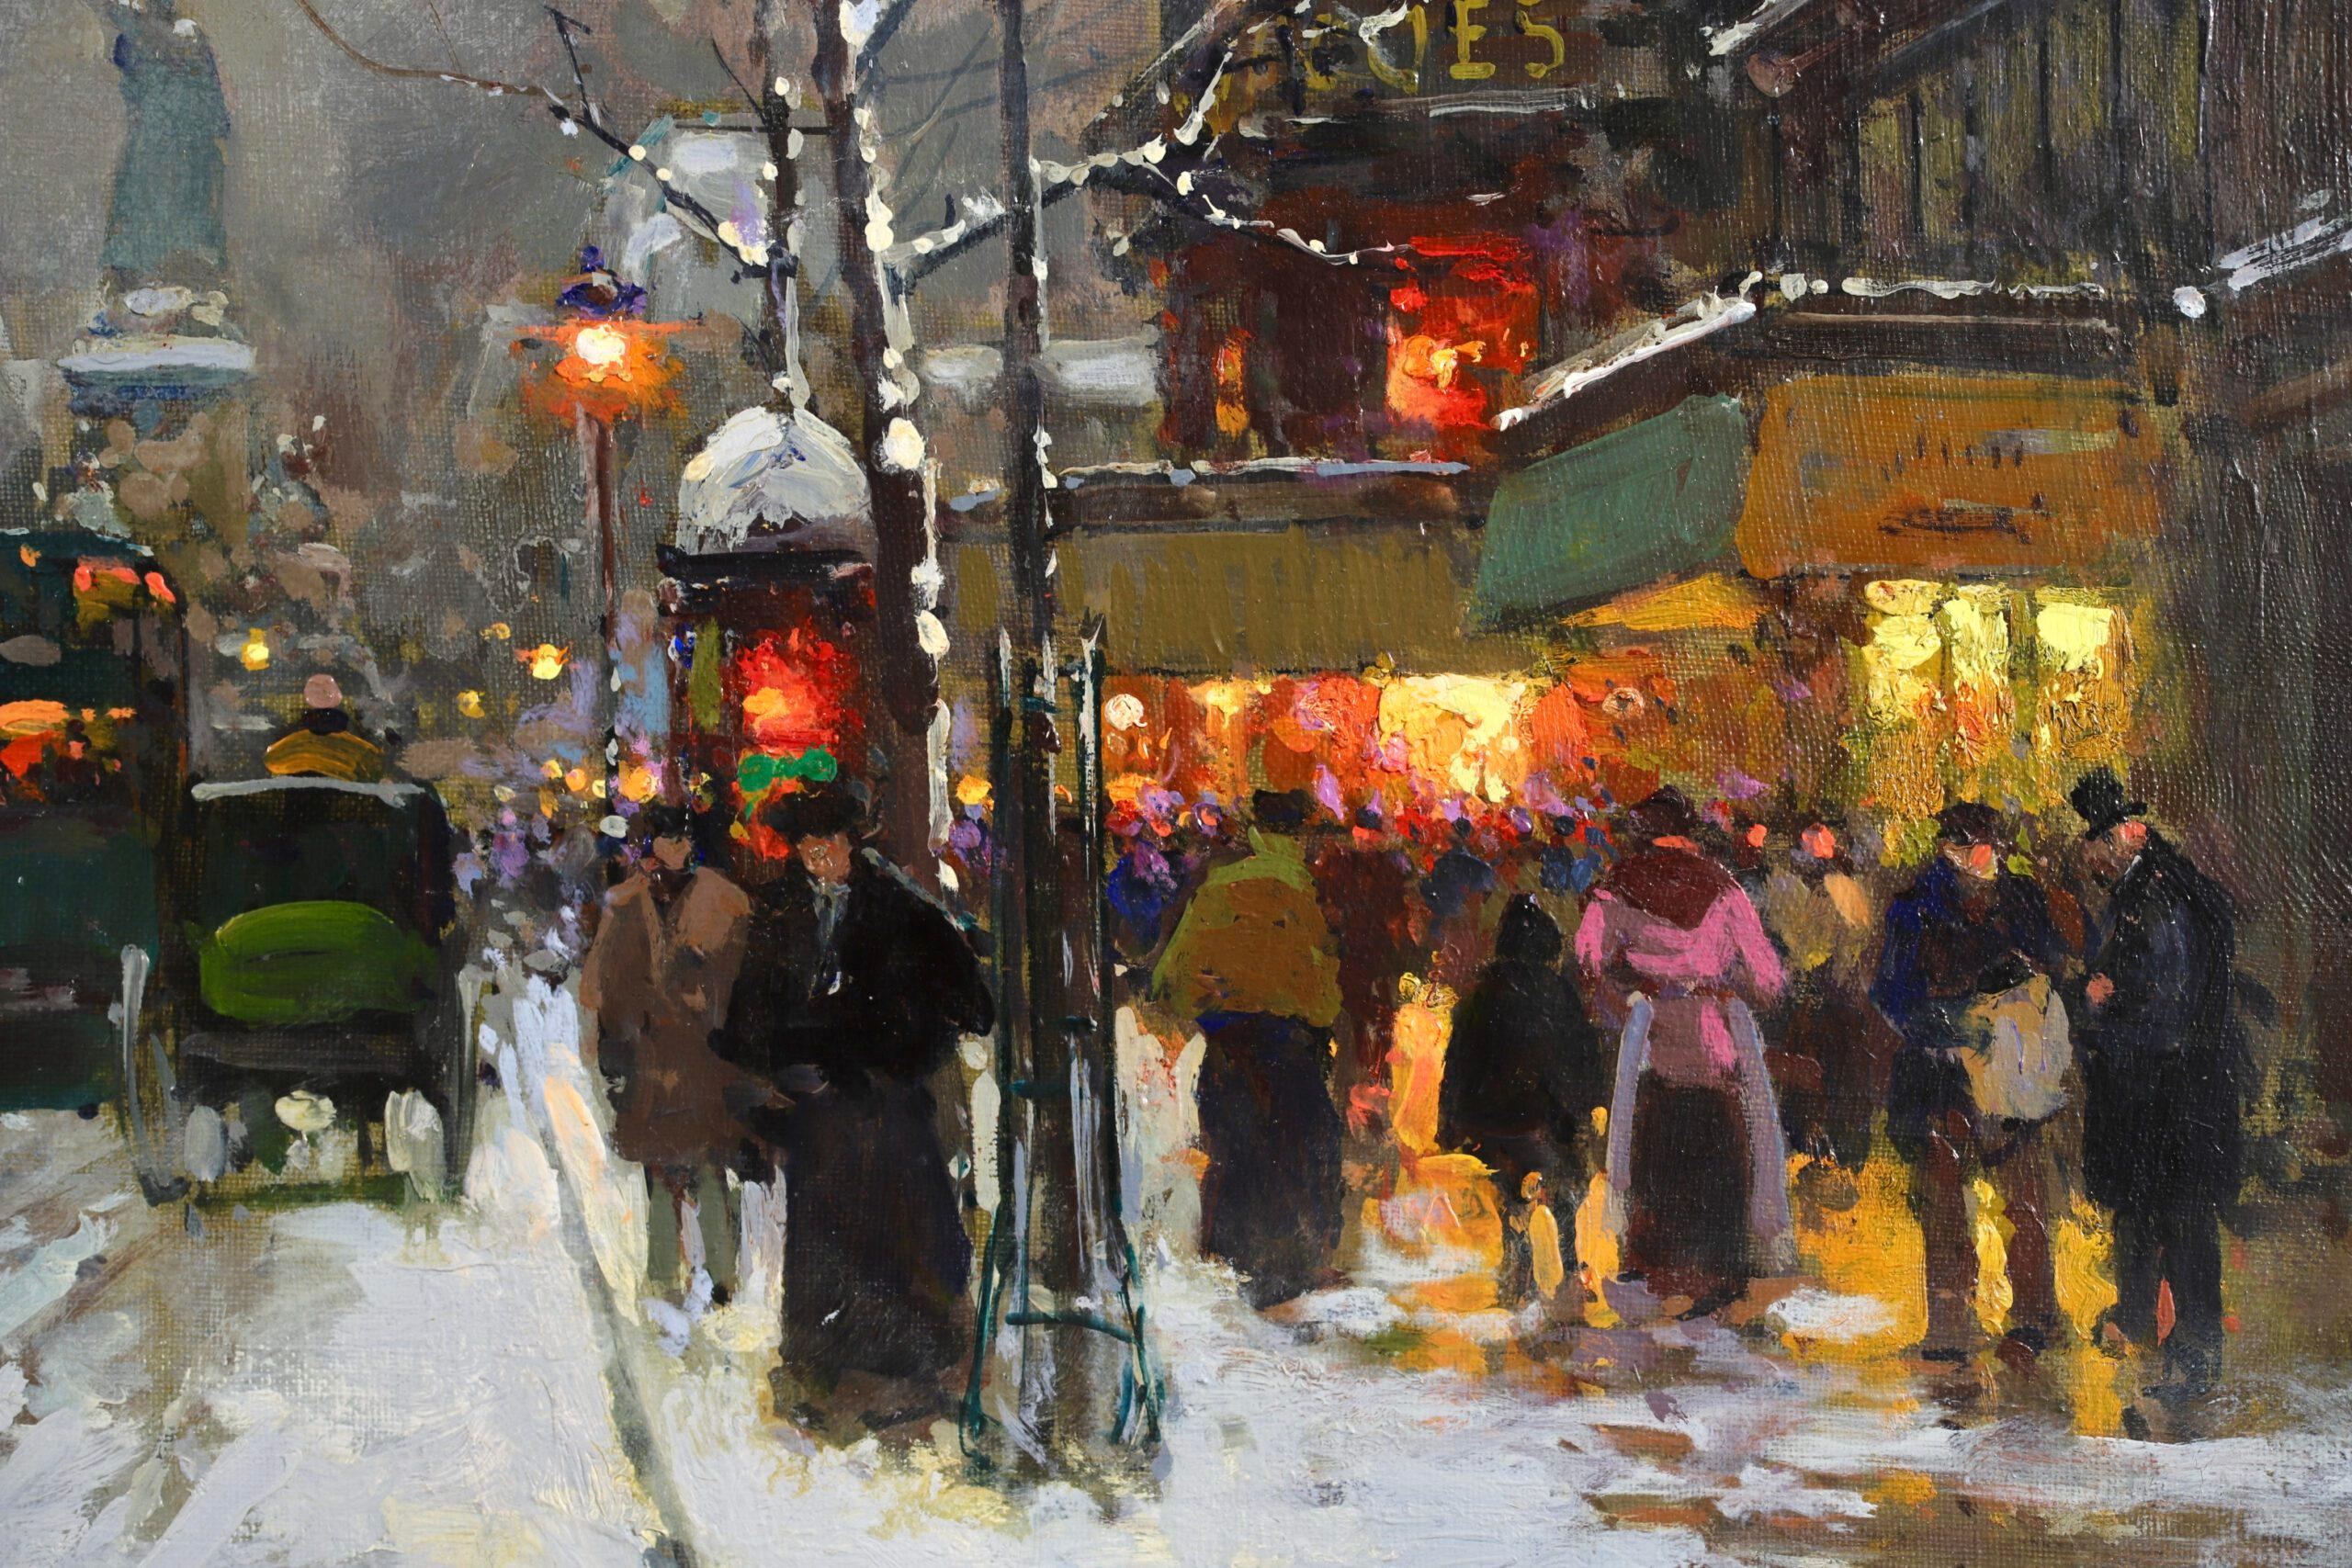 Signed impressionist oil on canvas landscape circa 1950 by sought after French painter Edouard Cortes. The work depicts an evening scene of the Place de la Republique square in Paris France. The ground, bare trees and buildings are covered in a